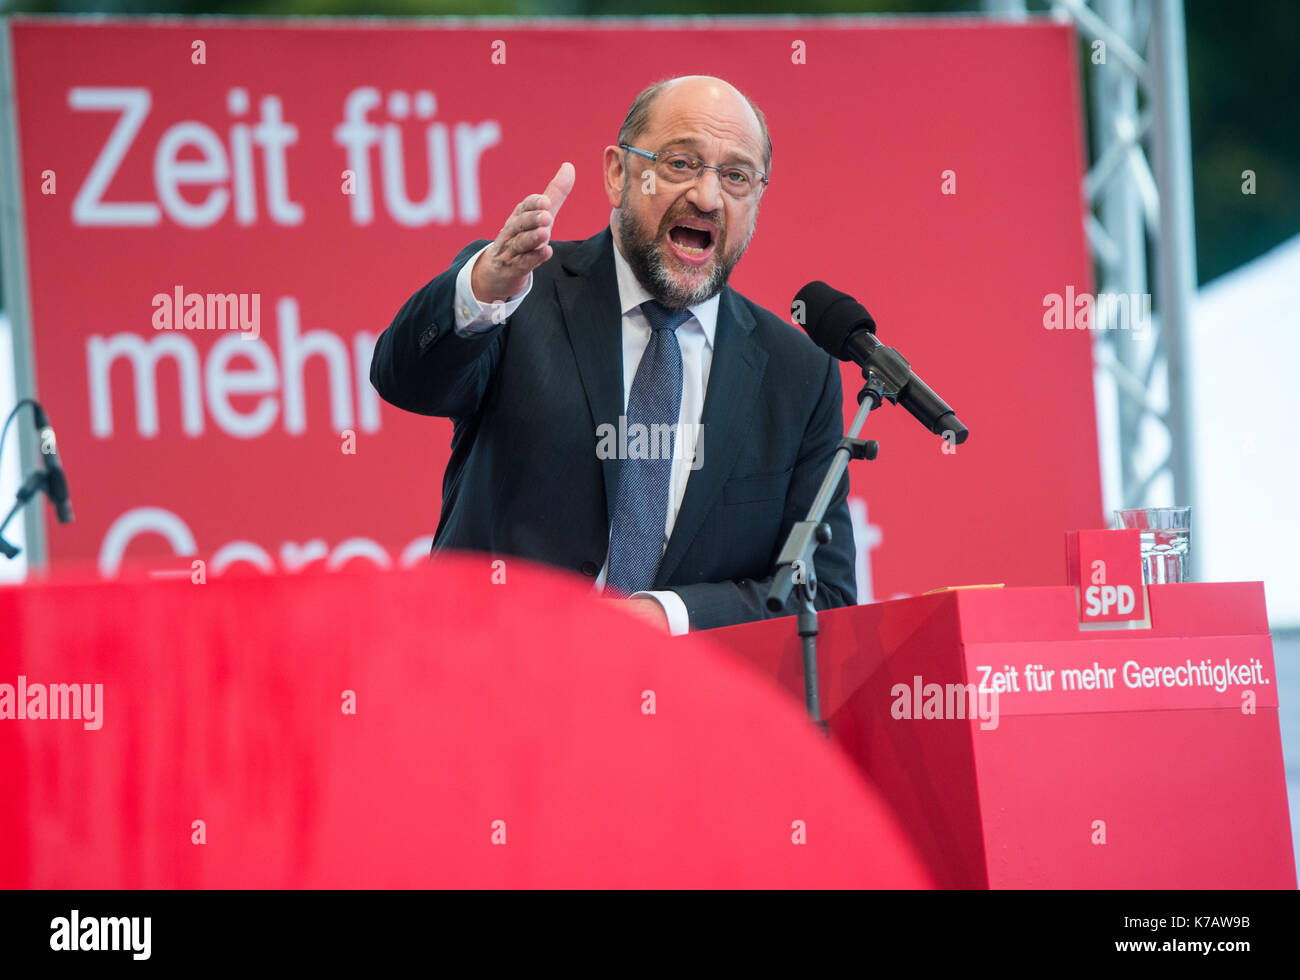 Schwerin, Germany. 15th Sep, 2017. Martin Schulz, candidate for chancellorship from the Social Democratic Party of Germany (SPD), speaking at an election campaign event in Schwerin, Germany, 15 September 2017. Photo: Jens Büttner/dpa-Zentralbild/dpa/Alamy Live News Stock Photo